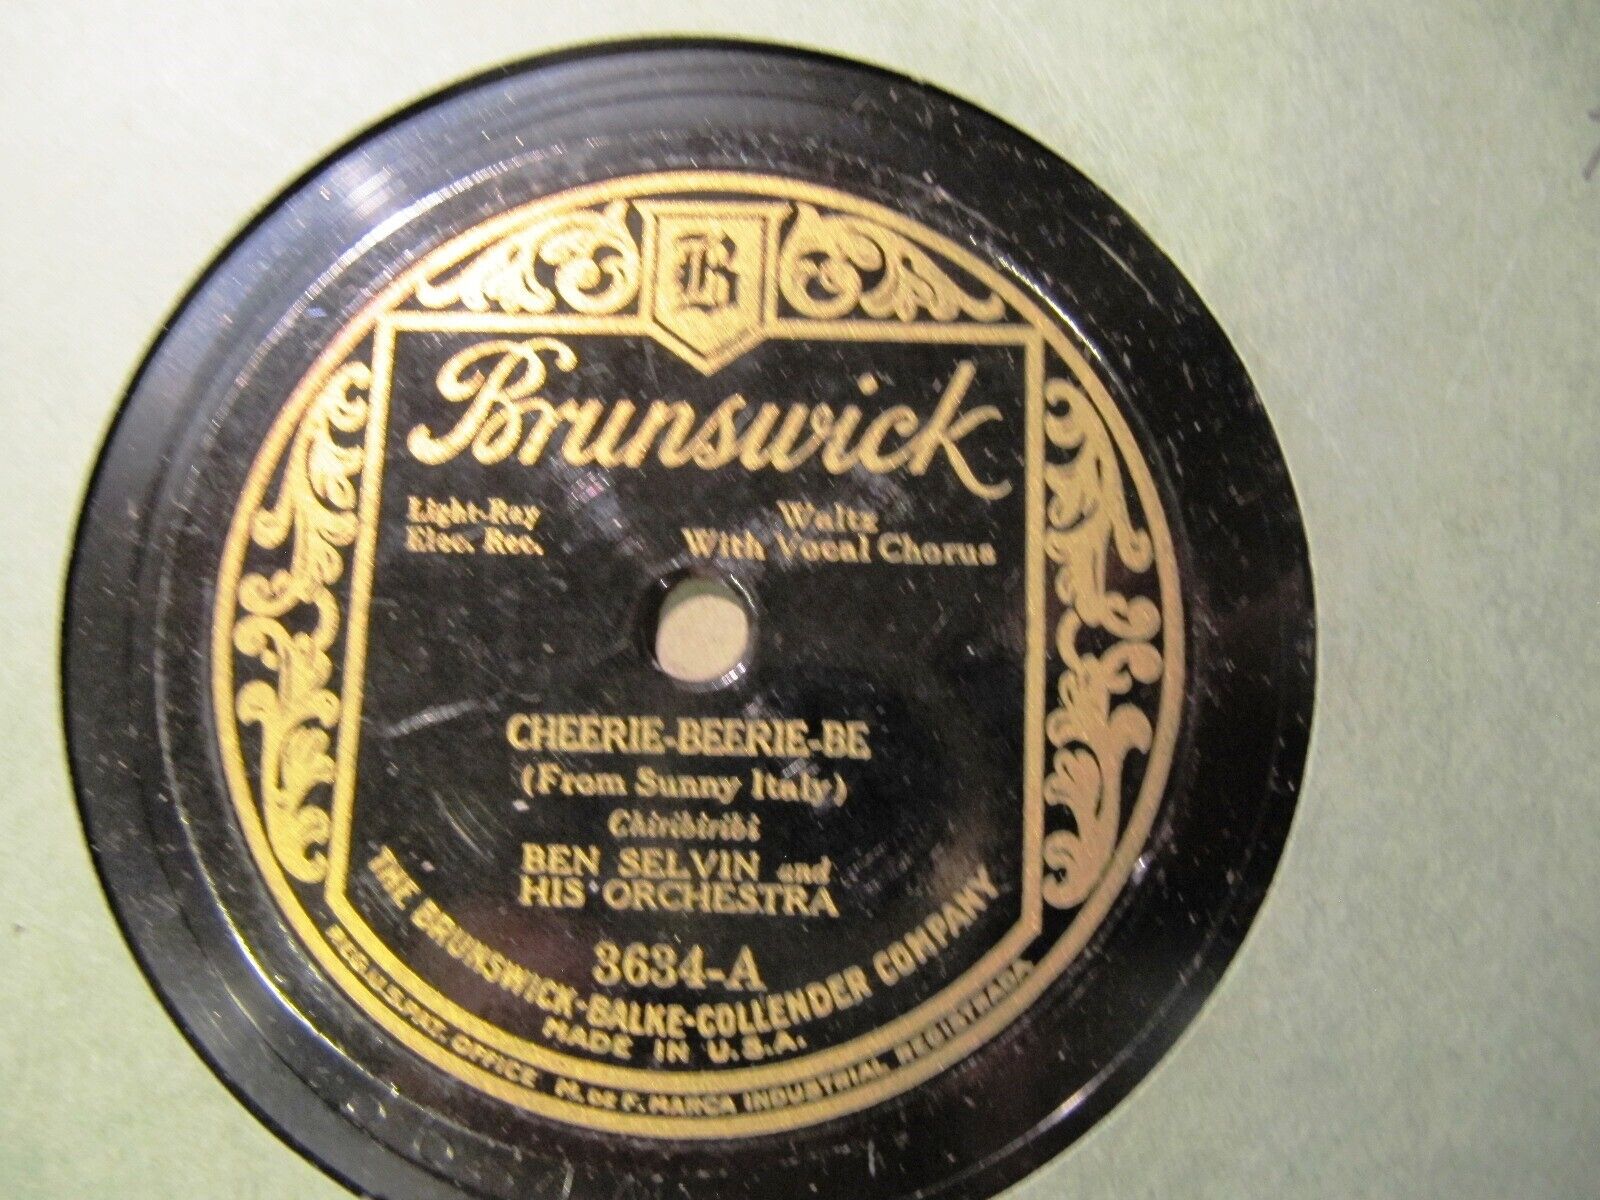 1927 Ben Selvin Bill Perry Cheerie Beerie Bee from Sunny Italy BRUNSWICK 3634